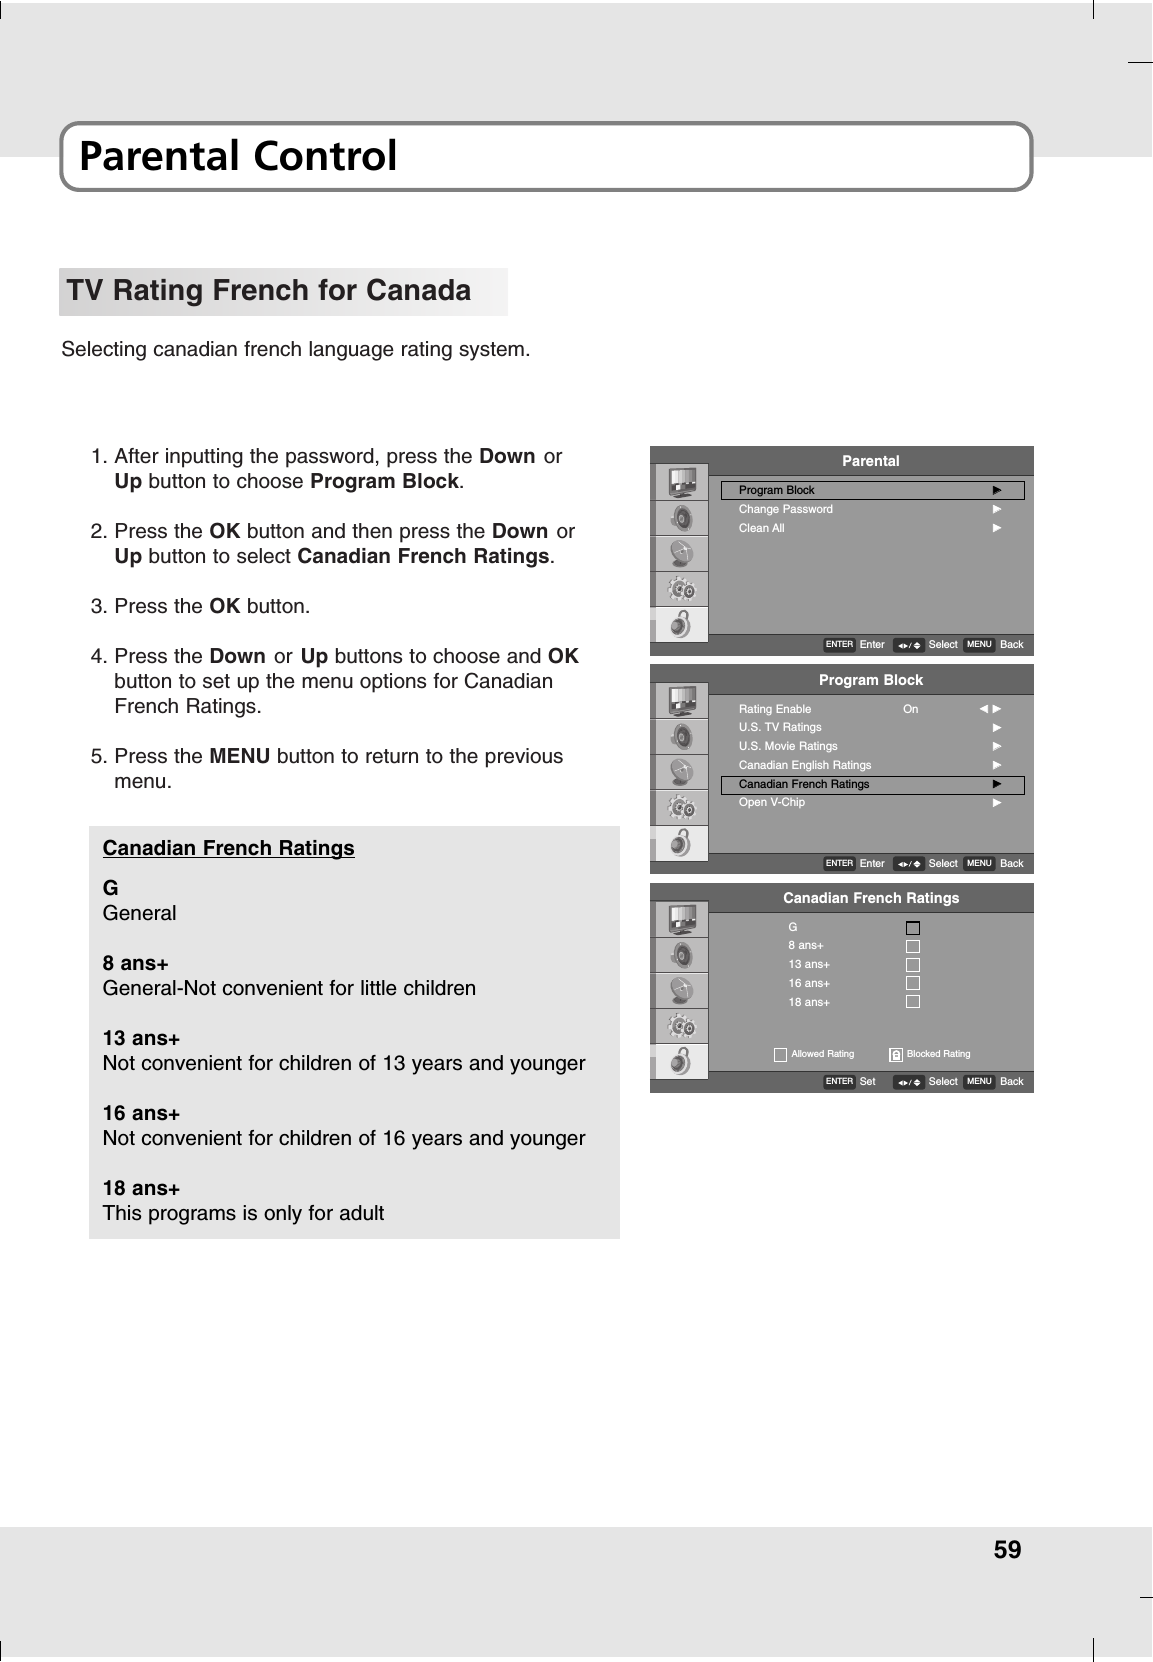 59Parental ControlTV Rating French for CanadaSelecting canadian french language rating system.1. After inputting the password, press the Down orUp button to choose Program Block.2. Press the OK button and then press the Down orUp button to select Canadian French Ratings.3. Press the OK button.4. Press the Down or Up buttons to choose and OKbutton to set up the menu options for CanadianFrench Ratings.5. Press the MENU button to return to the previousmenu.GGeneral8 ans+General-Not convenient for little children13 ans+Not convenient for children of 13 years and younger16 ans+Not convenient for children of 16 years and younger18 ans+This programs is only for adultCanadian French RatingsParentalProgram BlockChange PasswordClean AllGGGGGGENTEREnter MENU BackSelectProgram BlockRating EnableU.S. TV RatingsU.S. Movie RatingsCanadian English RatingsCanadian French RatingsOpen V-ChipOn FF  GGGGGGGGGGGGENTEREnter MENU BackSelectCanadian French RatingsENTERSet MENU BackSelectG8 ans+13 ans+16 ans+18 ans+Allowed Rating Blocked Rating